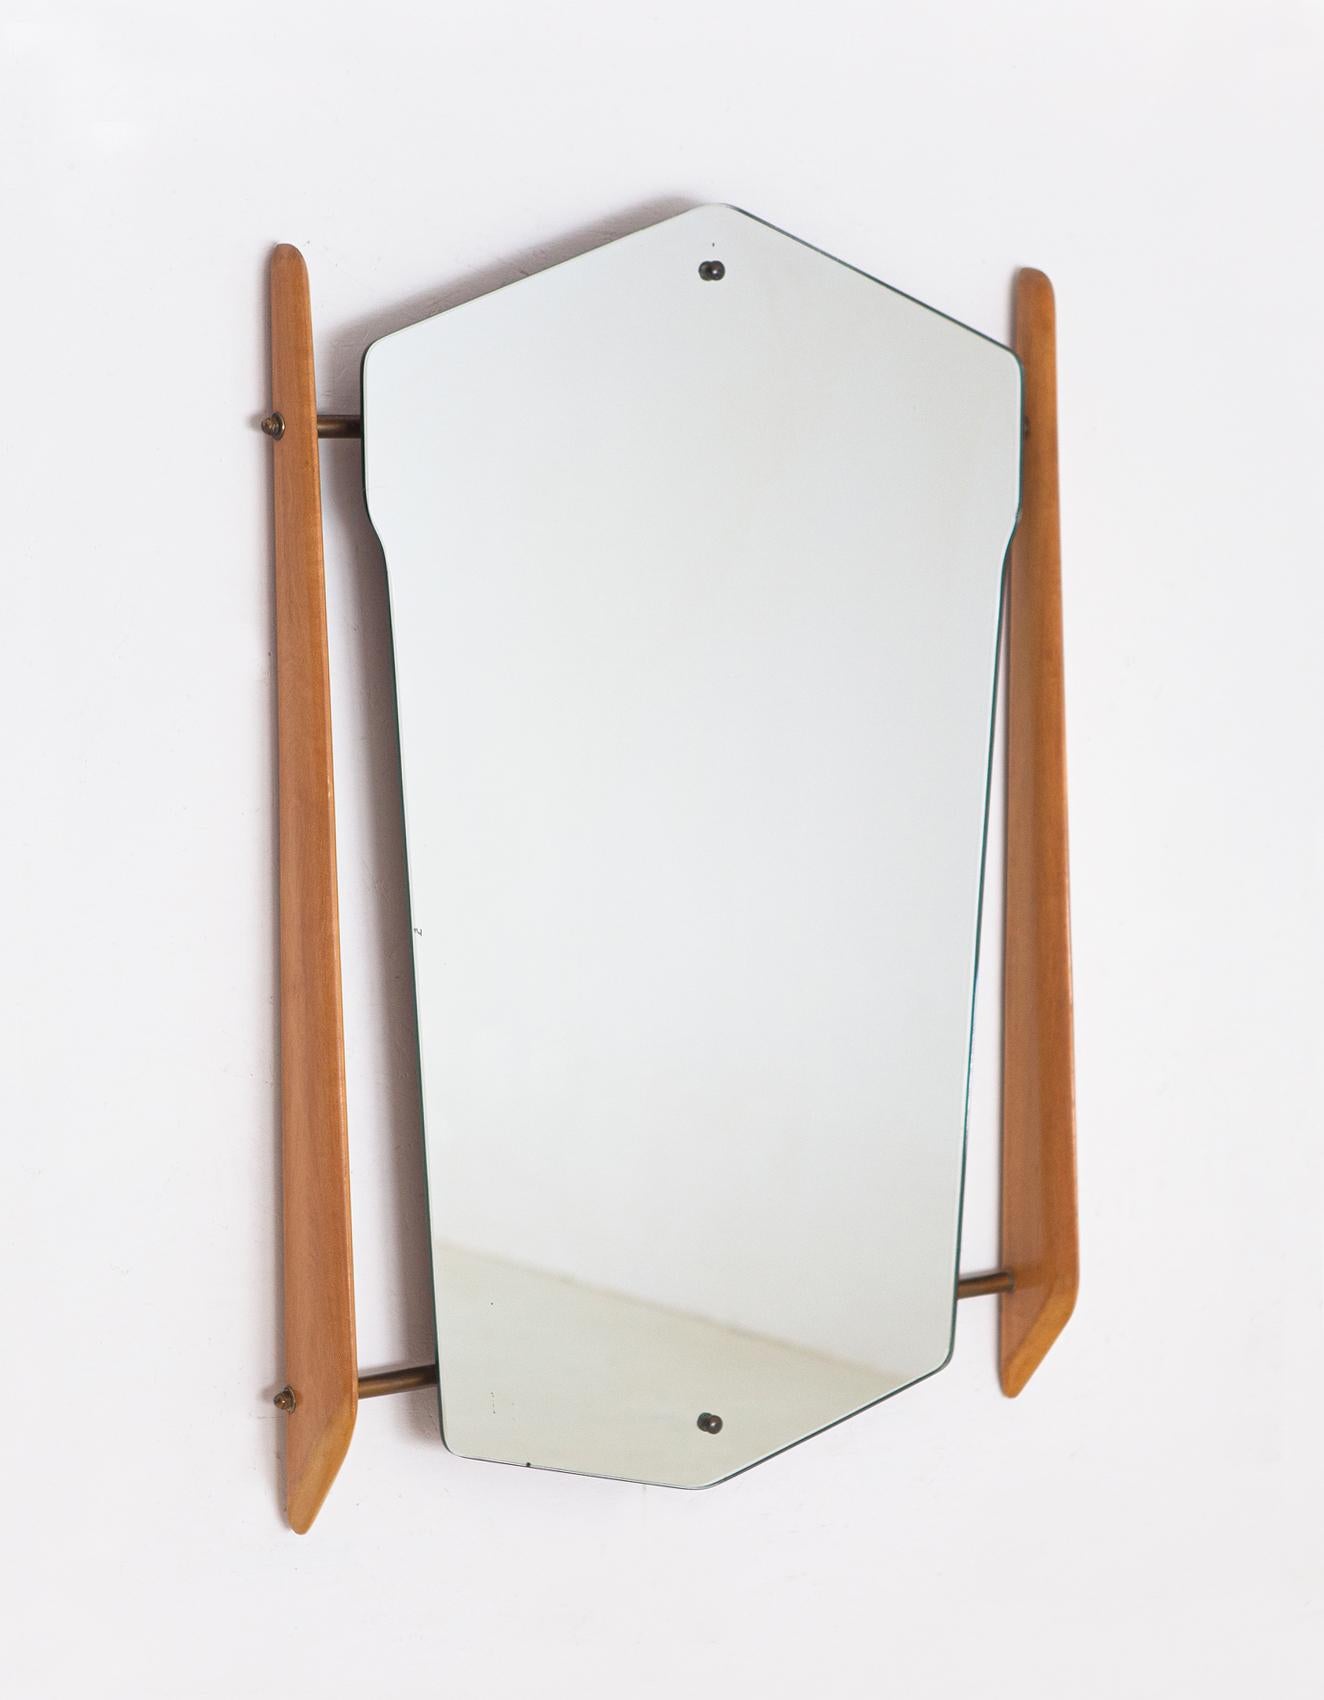 Italian wall mirror

Made of beechwood, mirrored glass and brass, the wooden parts has been refinished with shellac.

Measures: height 81cm, depth 8cm, width 61cm.